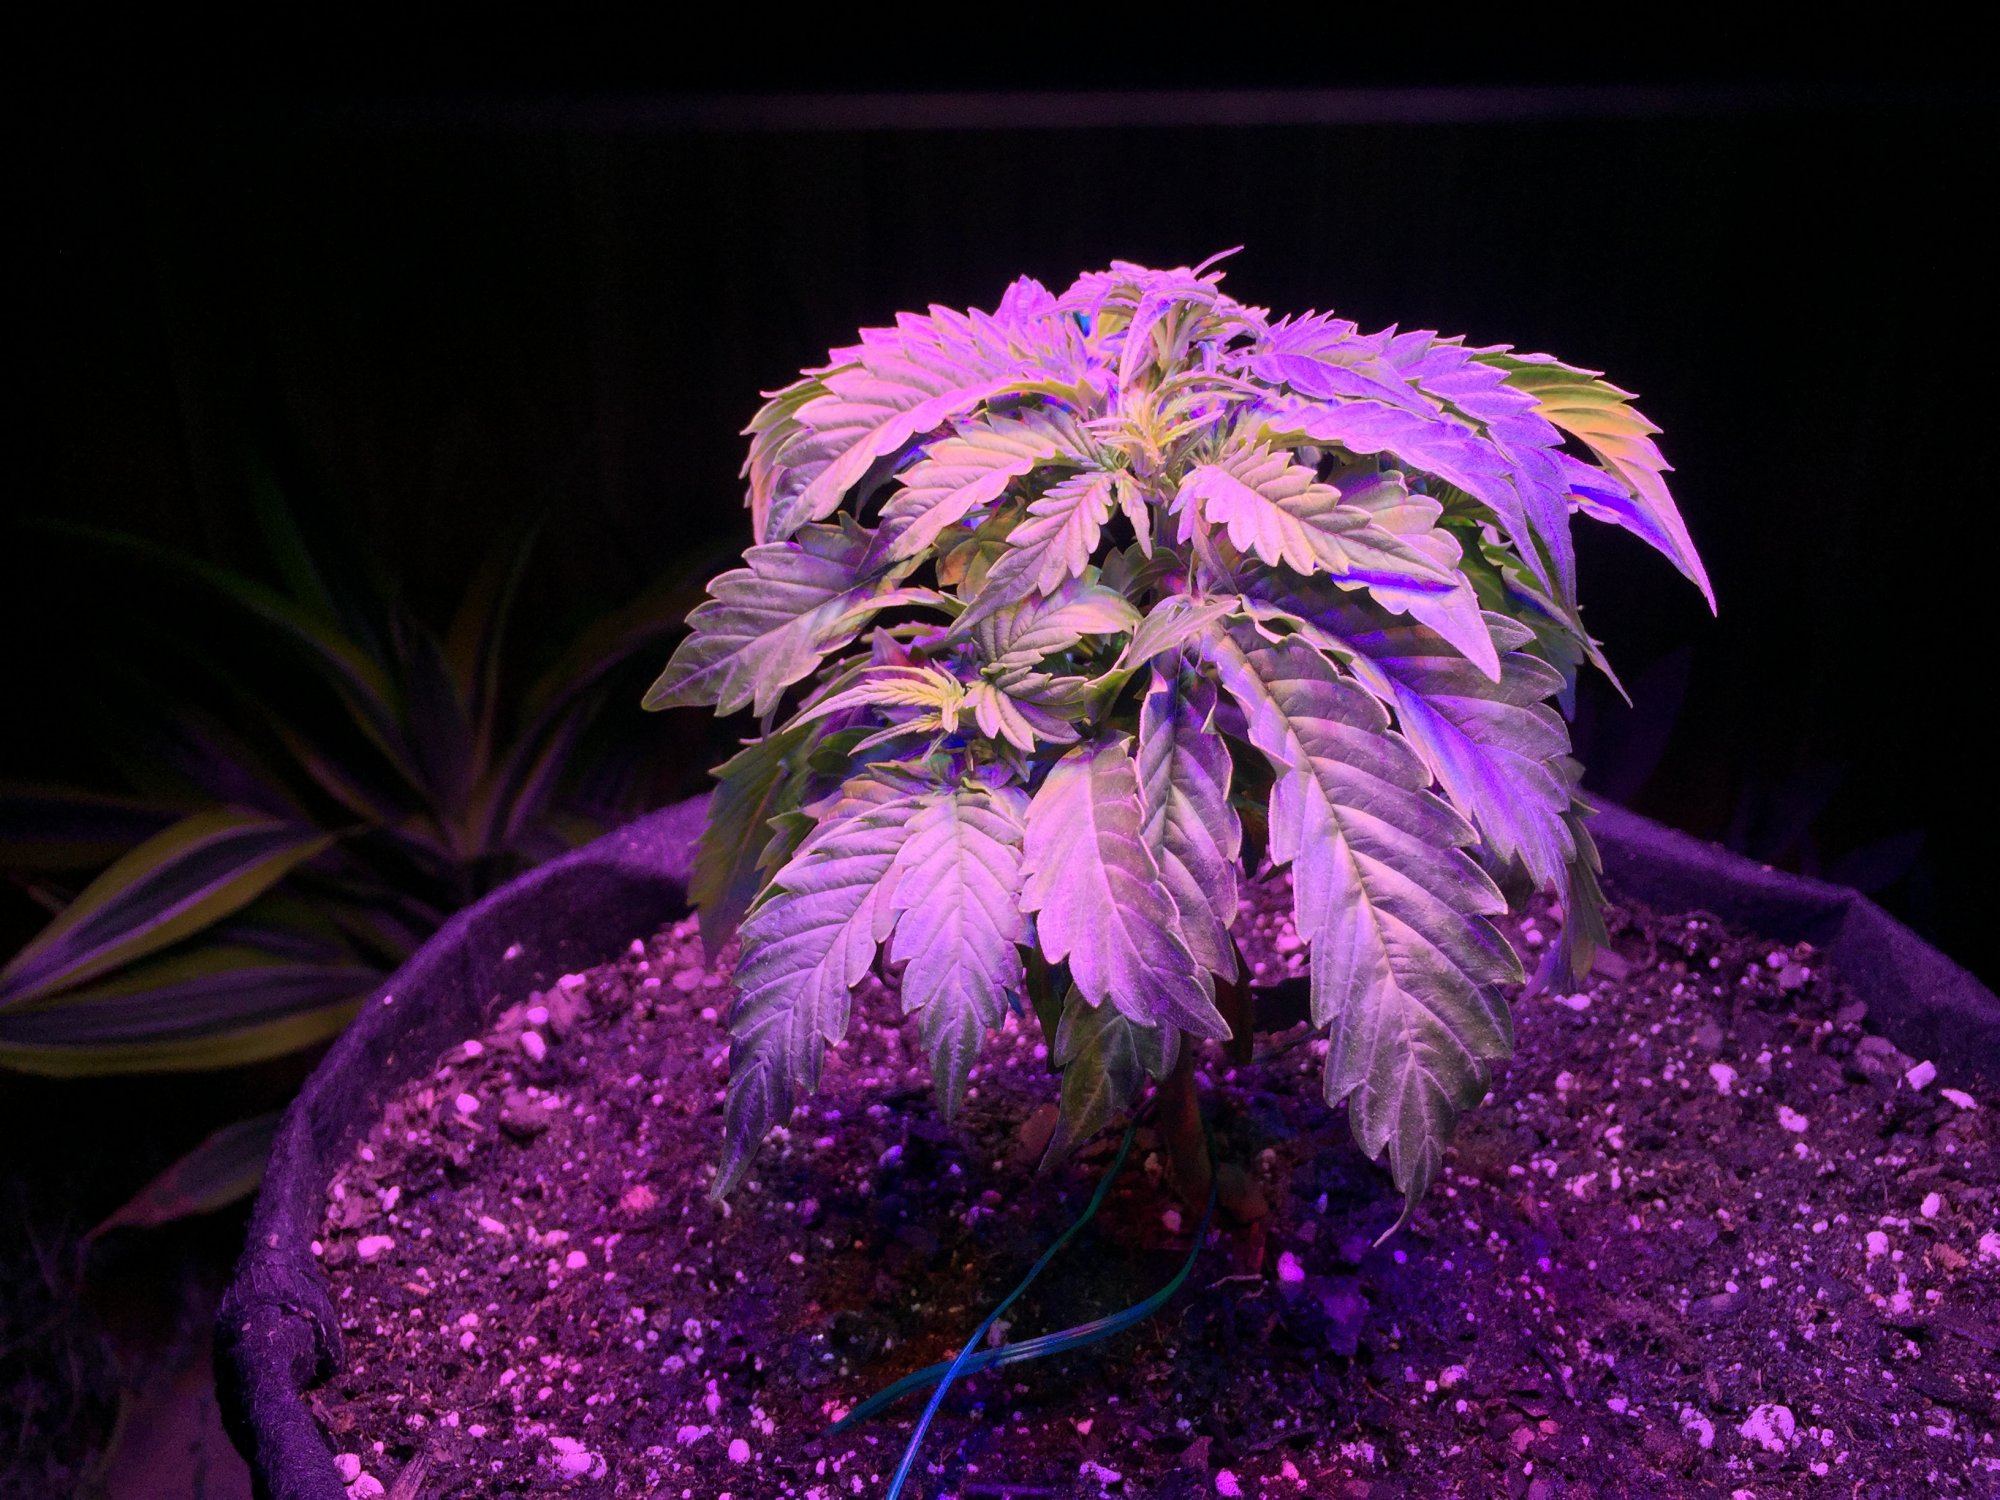 Stunted growth during veg harvest projections 3